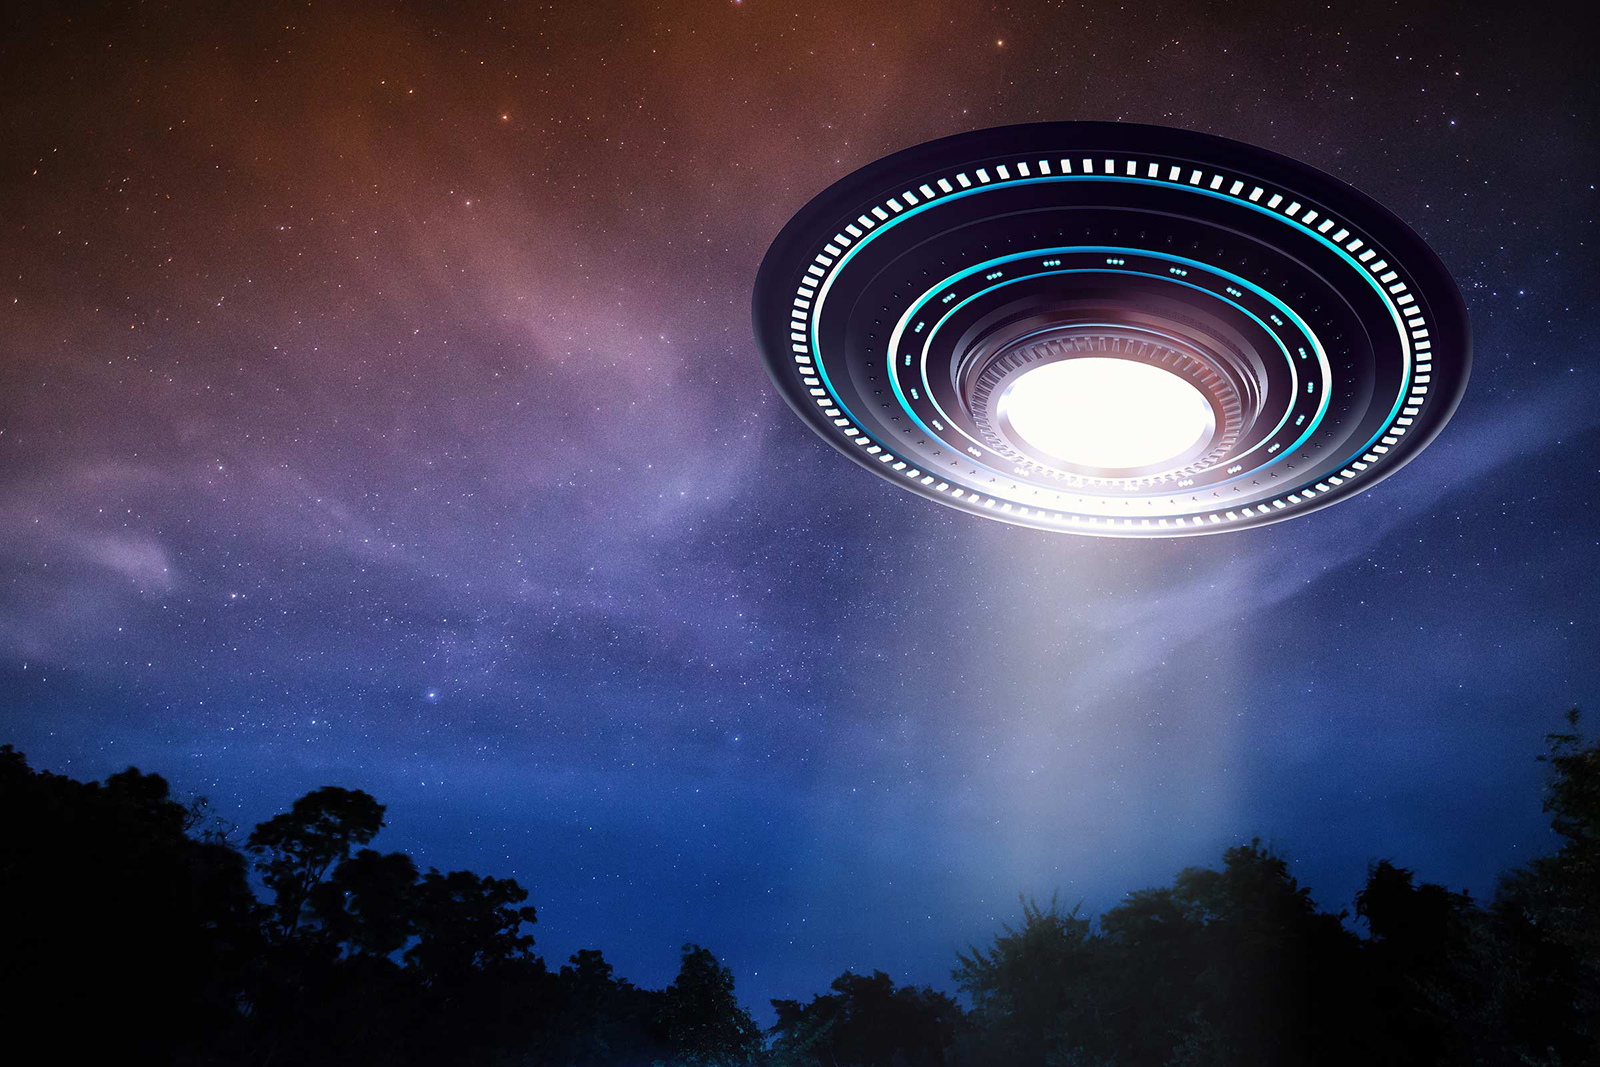 All this news from the Pentagon has people really questioning whether or not UFOS are real. So, are UFOs real, or are they just sci-fi myths?